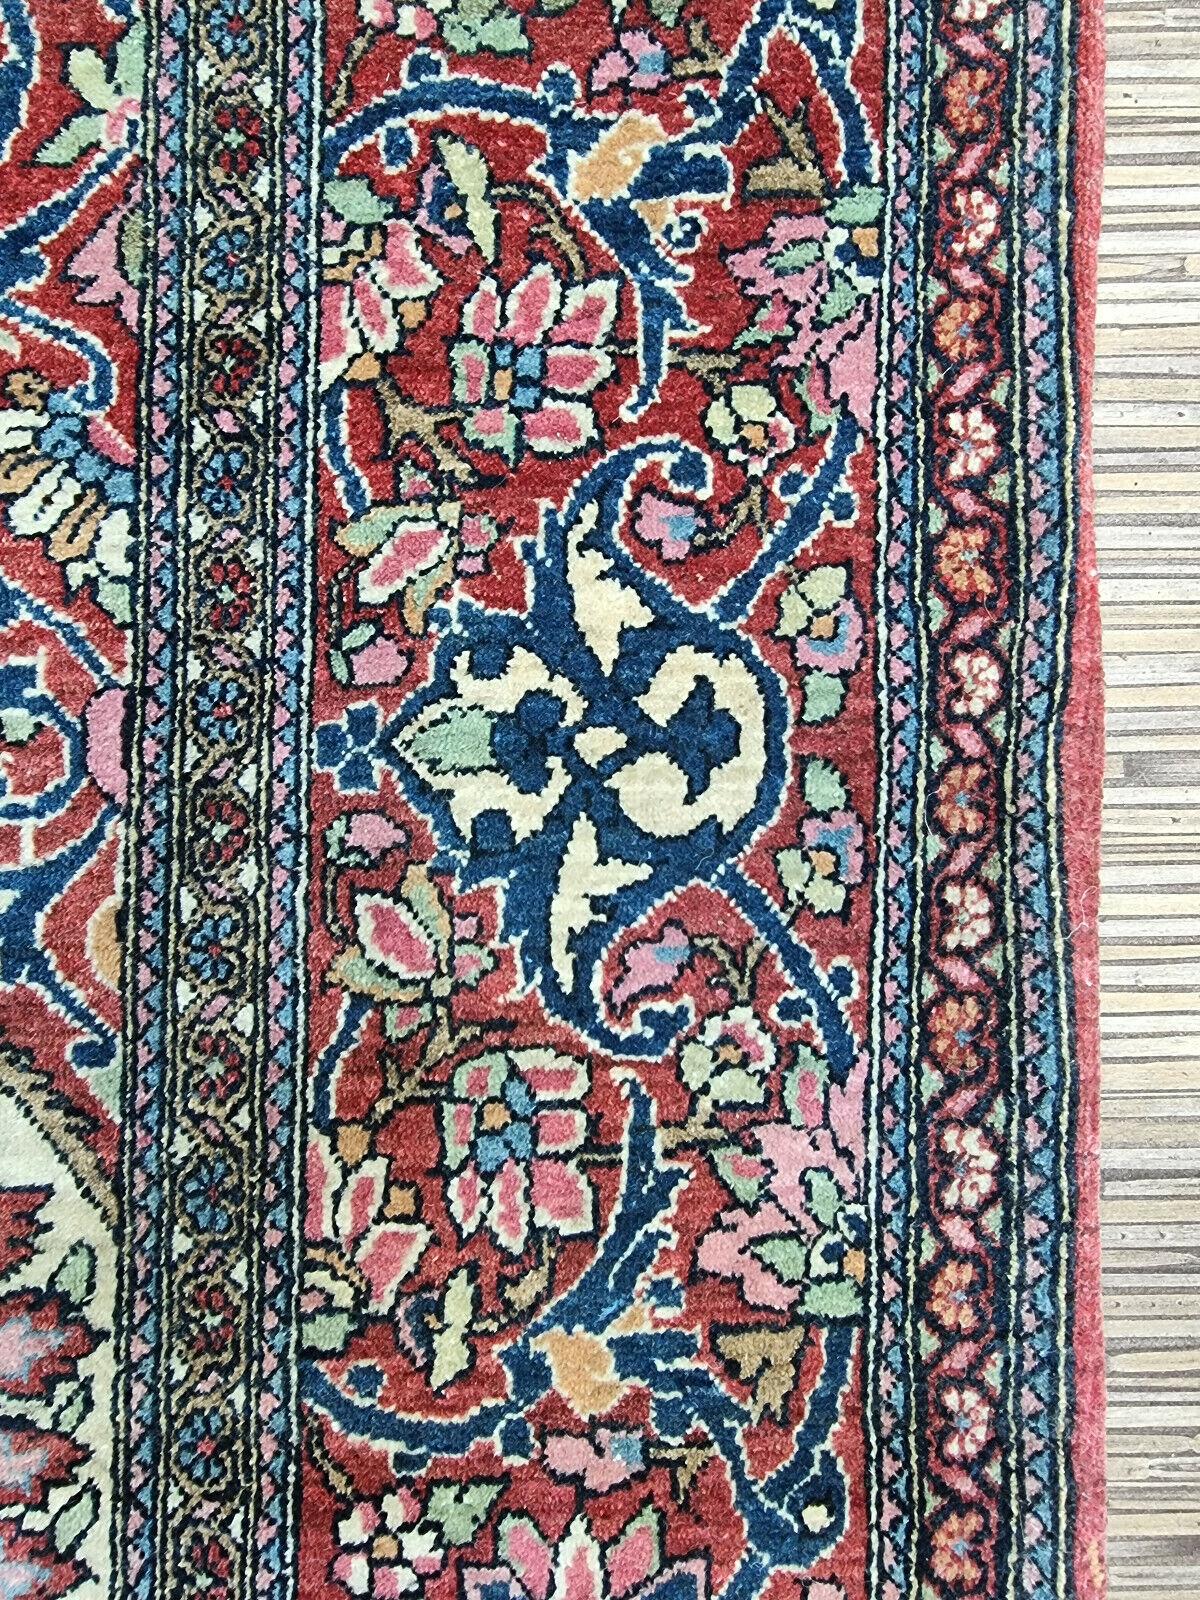 Handmade Antique Persian Style Isfahan Prayer Rug 4.6' x 6.8', 1900s - 1D85 For Sale 4